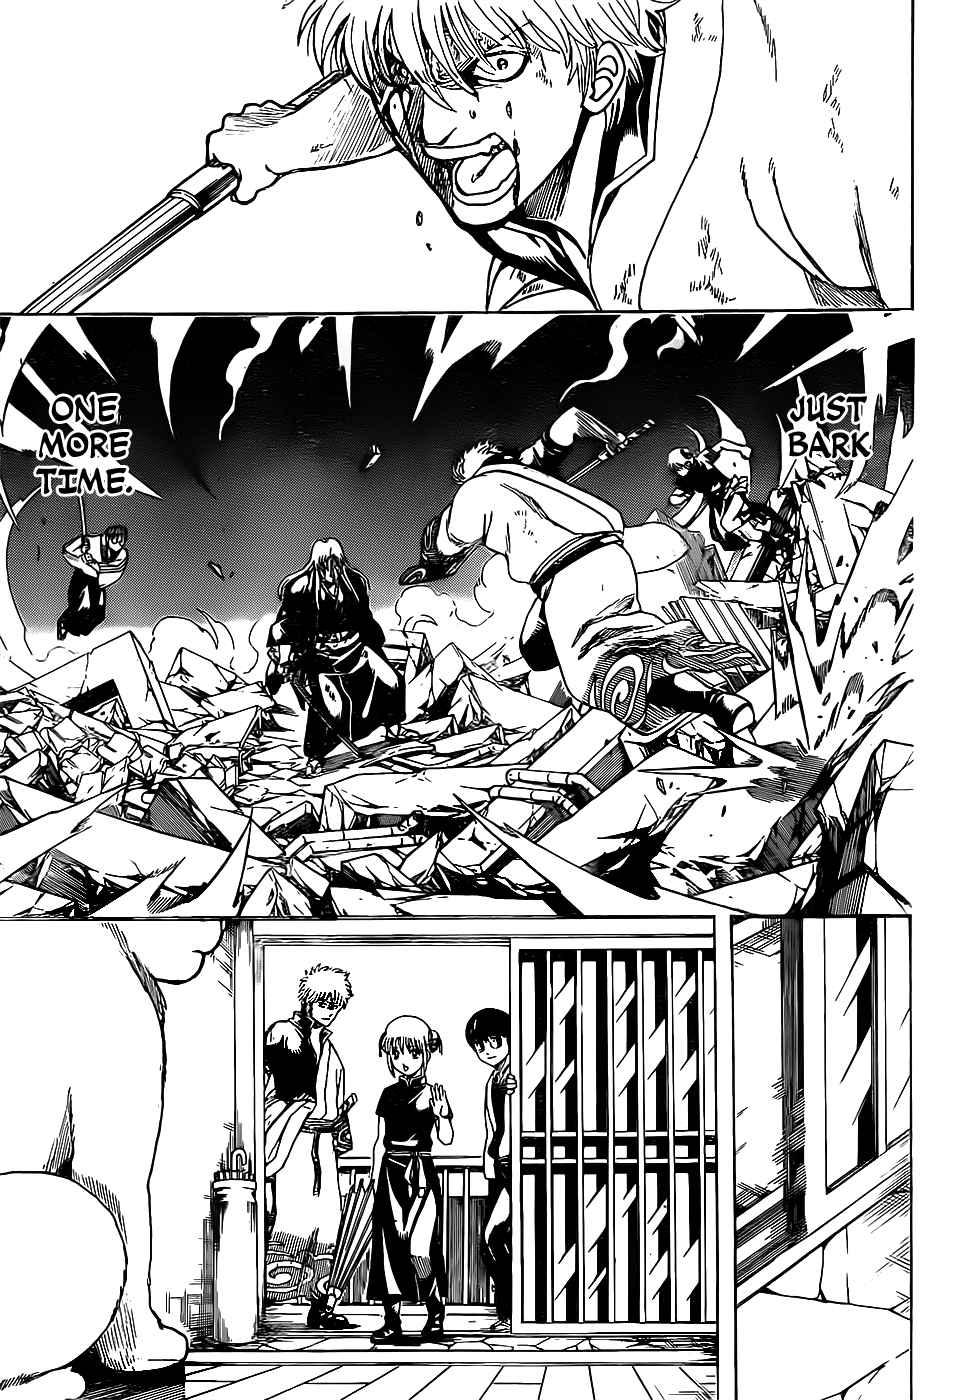 Gintama chapter 665 page 2